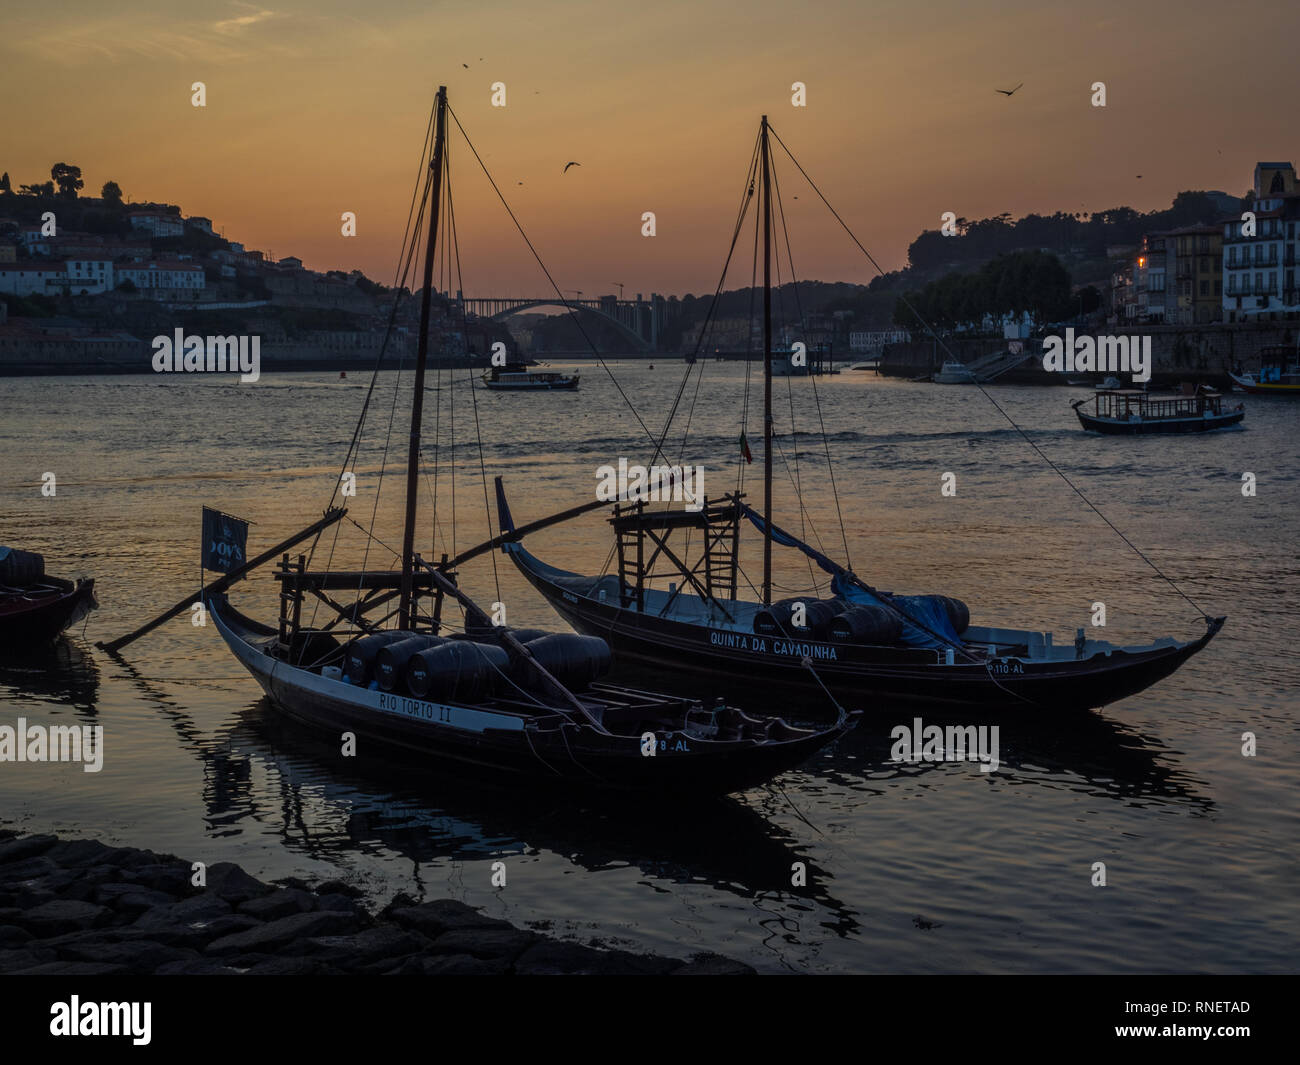 A sunset over the river Douro at low tide in Porto with a pair of two 2 yachts Quinta da Cavadinha and Rio Torto II in silhouette and bird flying Stock Photo